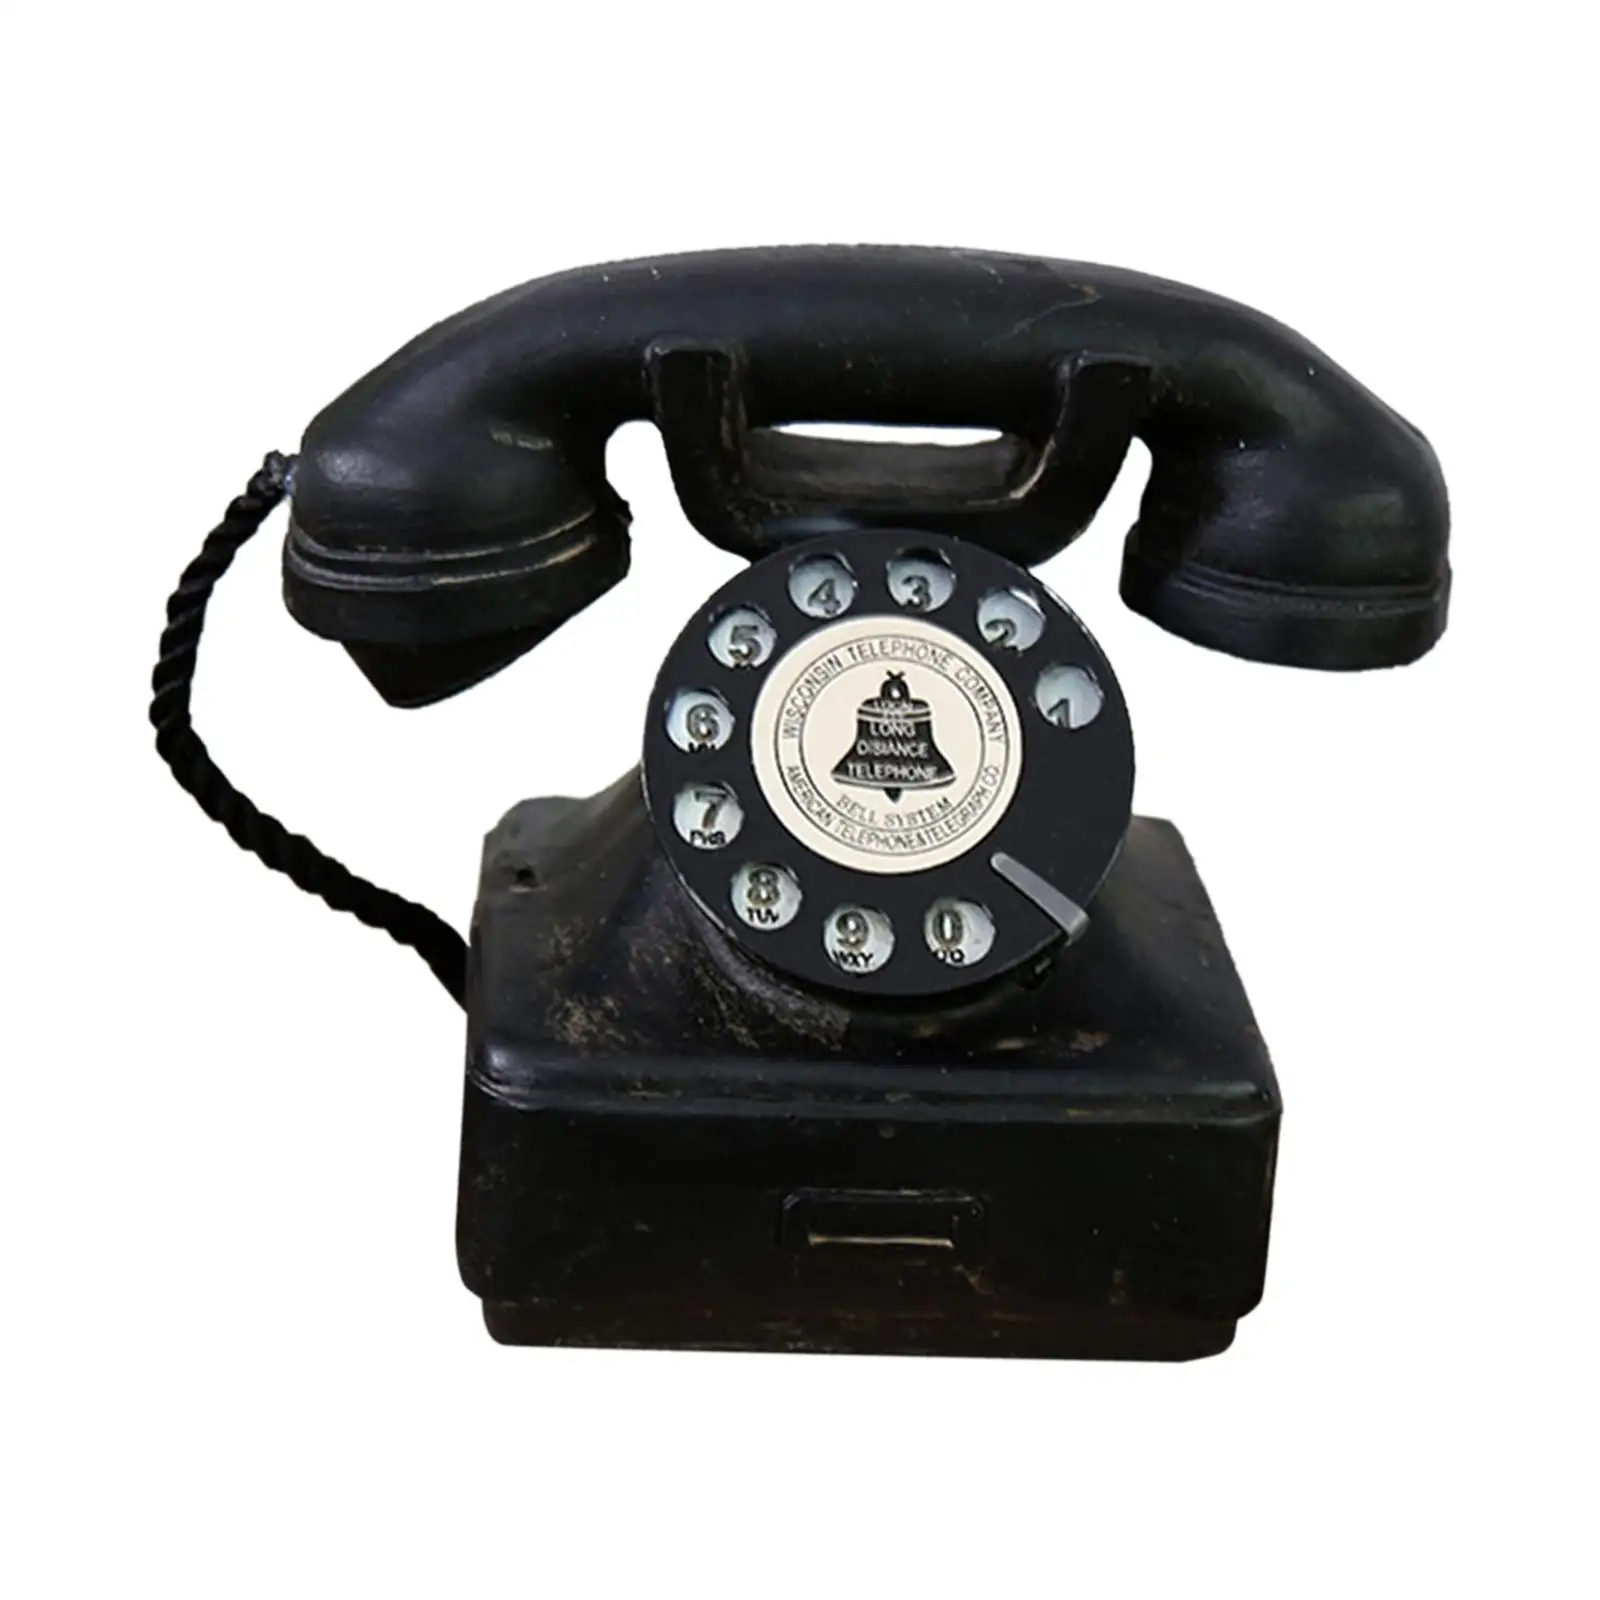 Creative Phone Model Photography Props Resin Classic Artist Figurine Corded Telephone for Bar office Desk Decorations